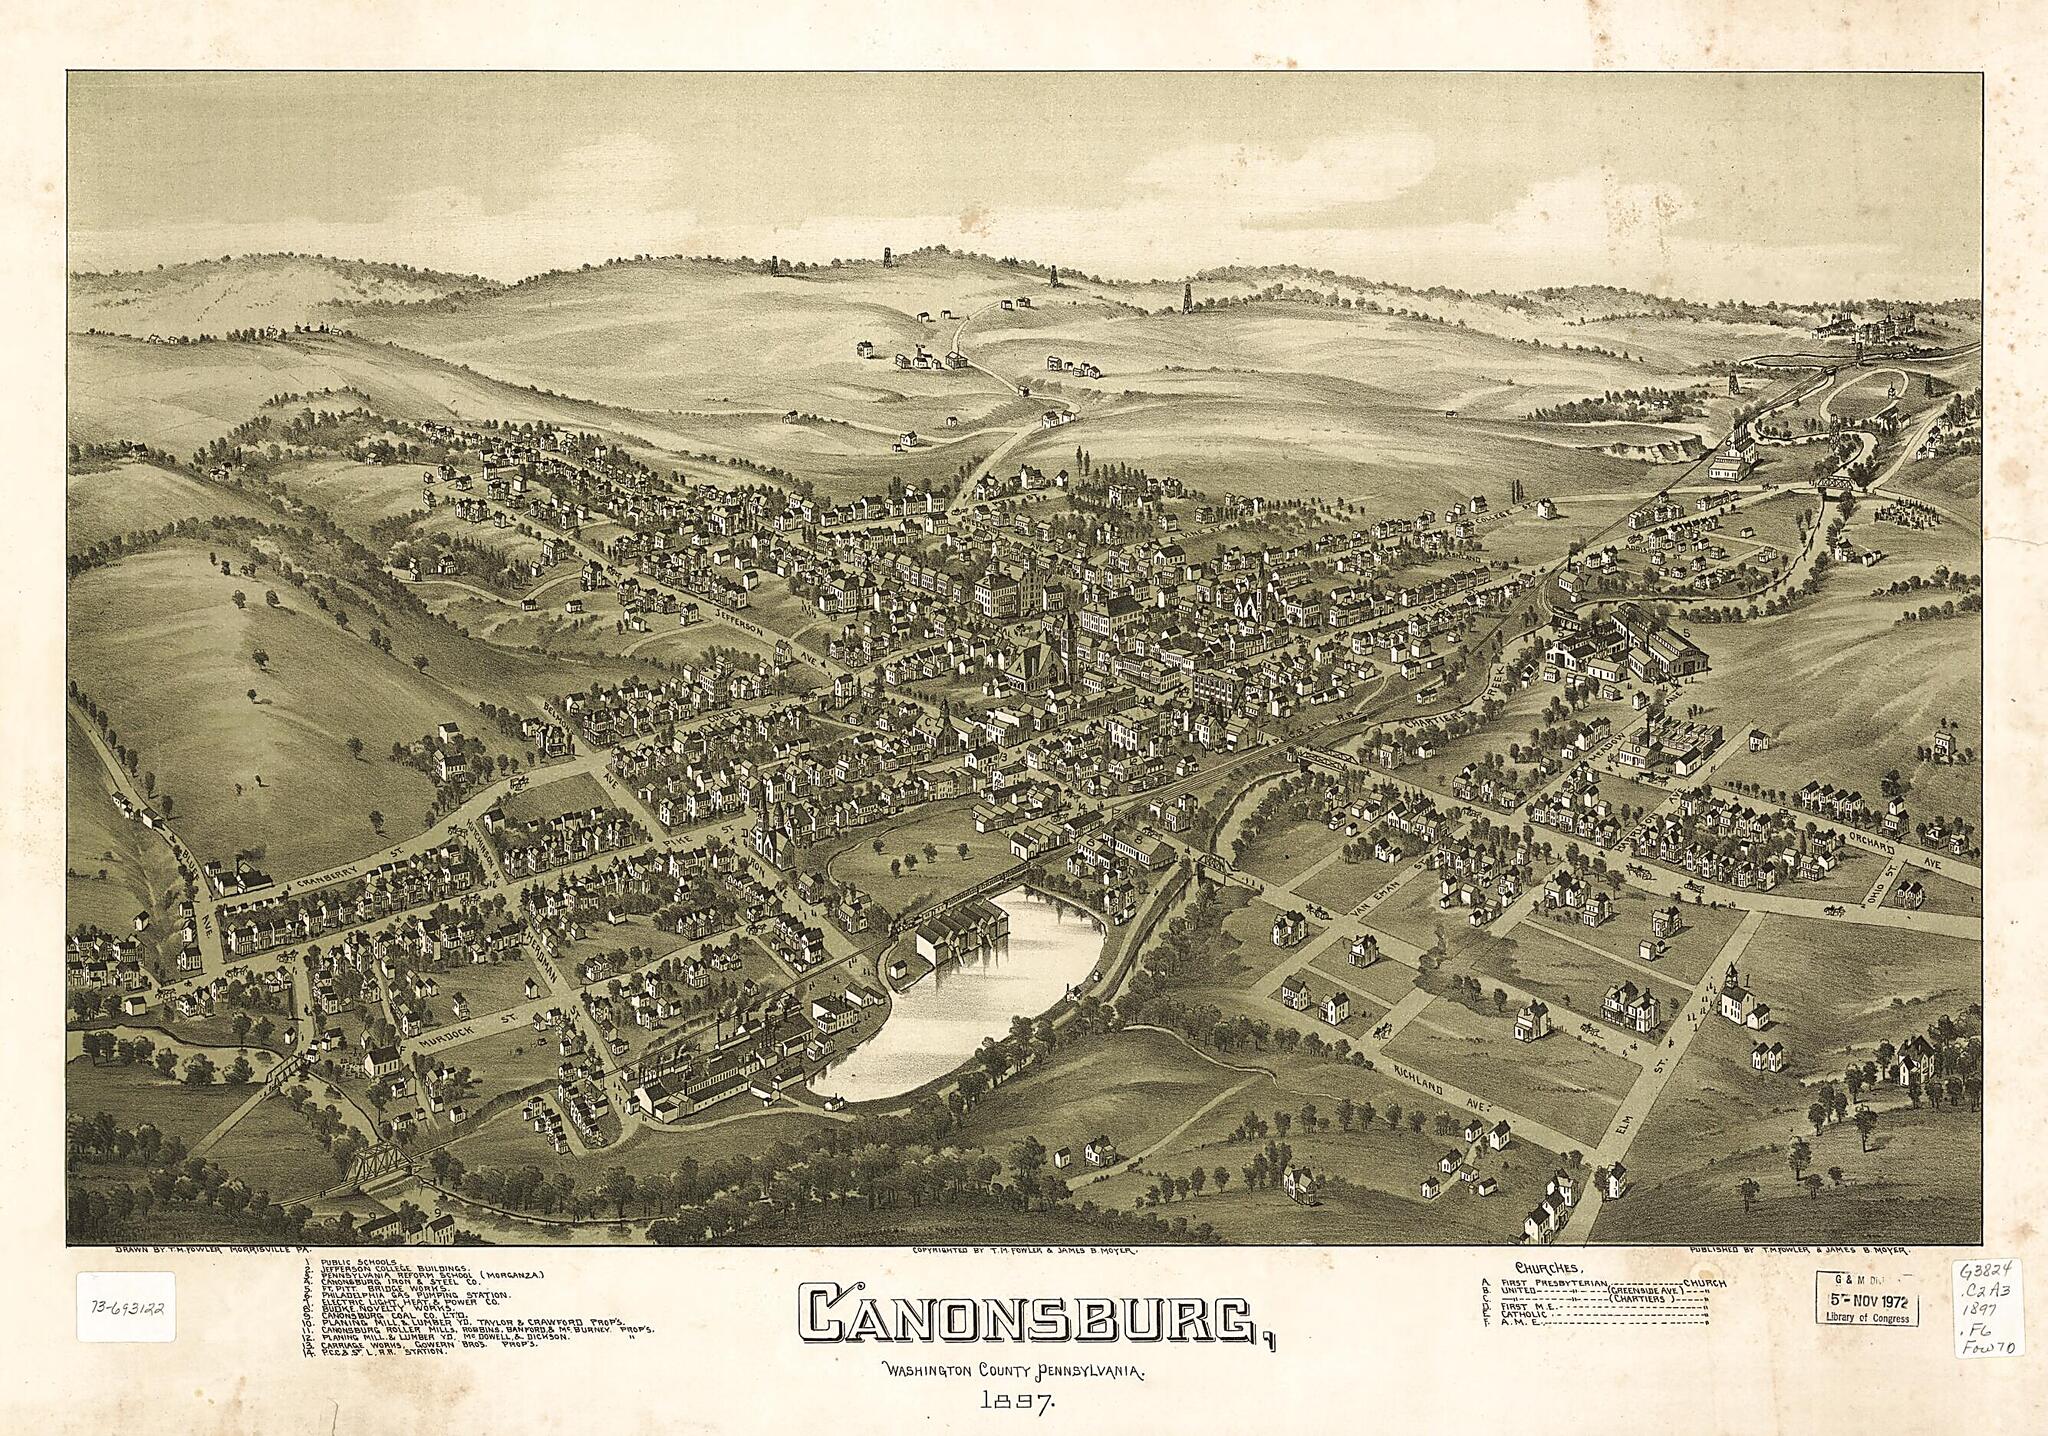 This old map of Canonsburg, Washington County, Pennsylvania from 1897 was created by T. M. (Thaddeus Mortimer) Fowler, James B. Moyer in 1897